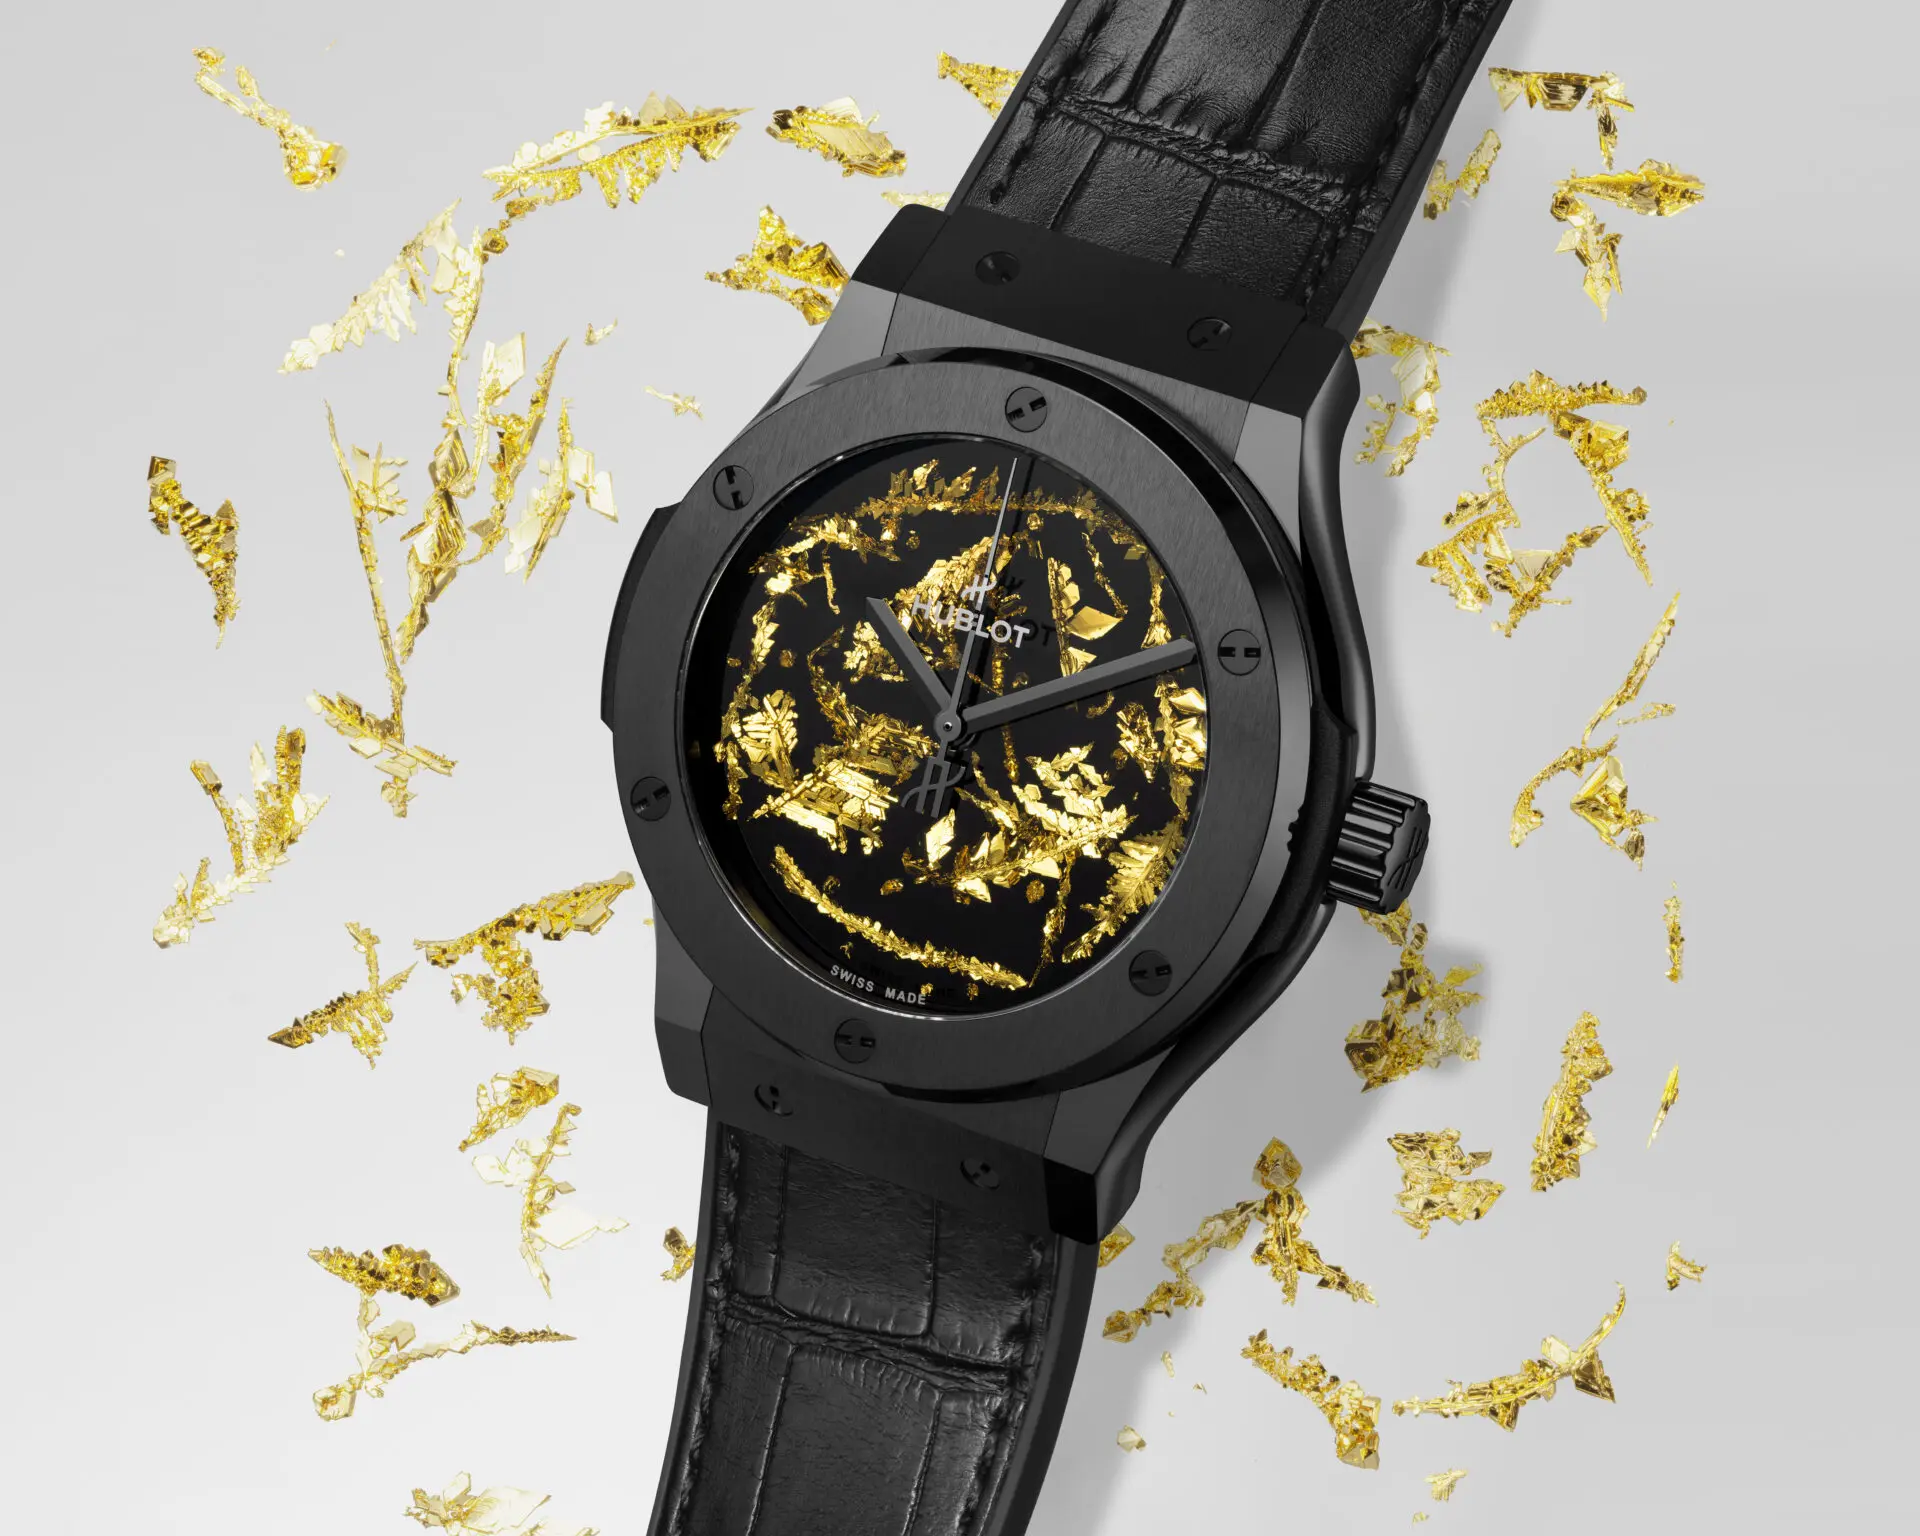 Hublot puts the Art of Fusion to the test with high-tech mechanical  innovations and groundbreaking design at LVMH Watch Week – Dubai 2020 - LVMH